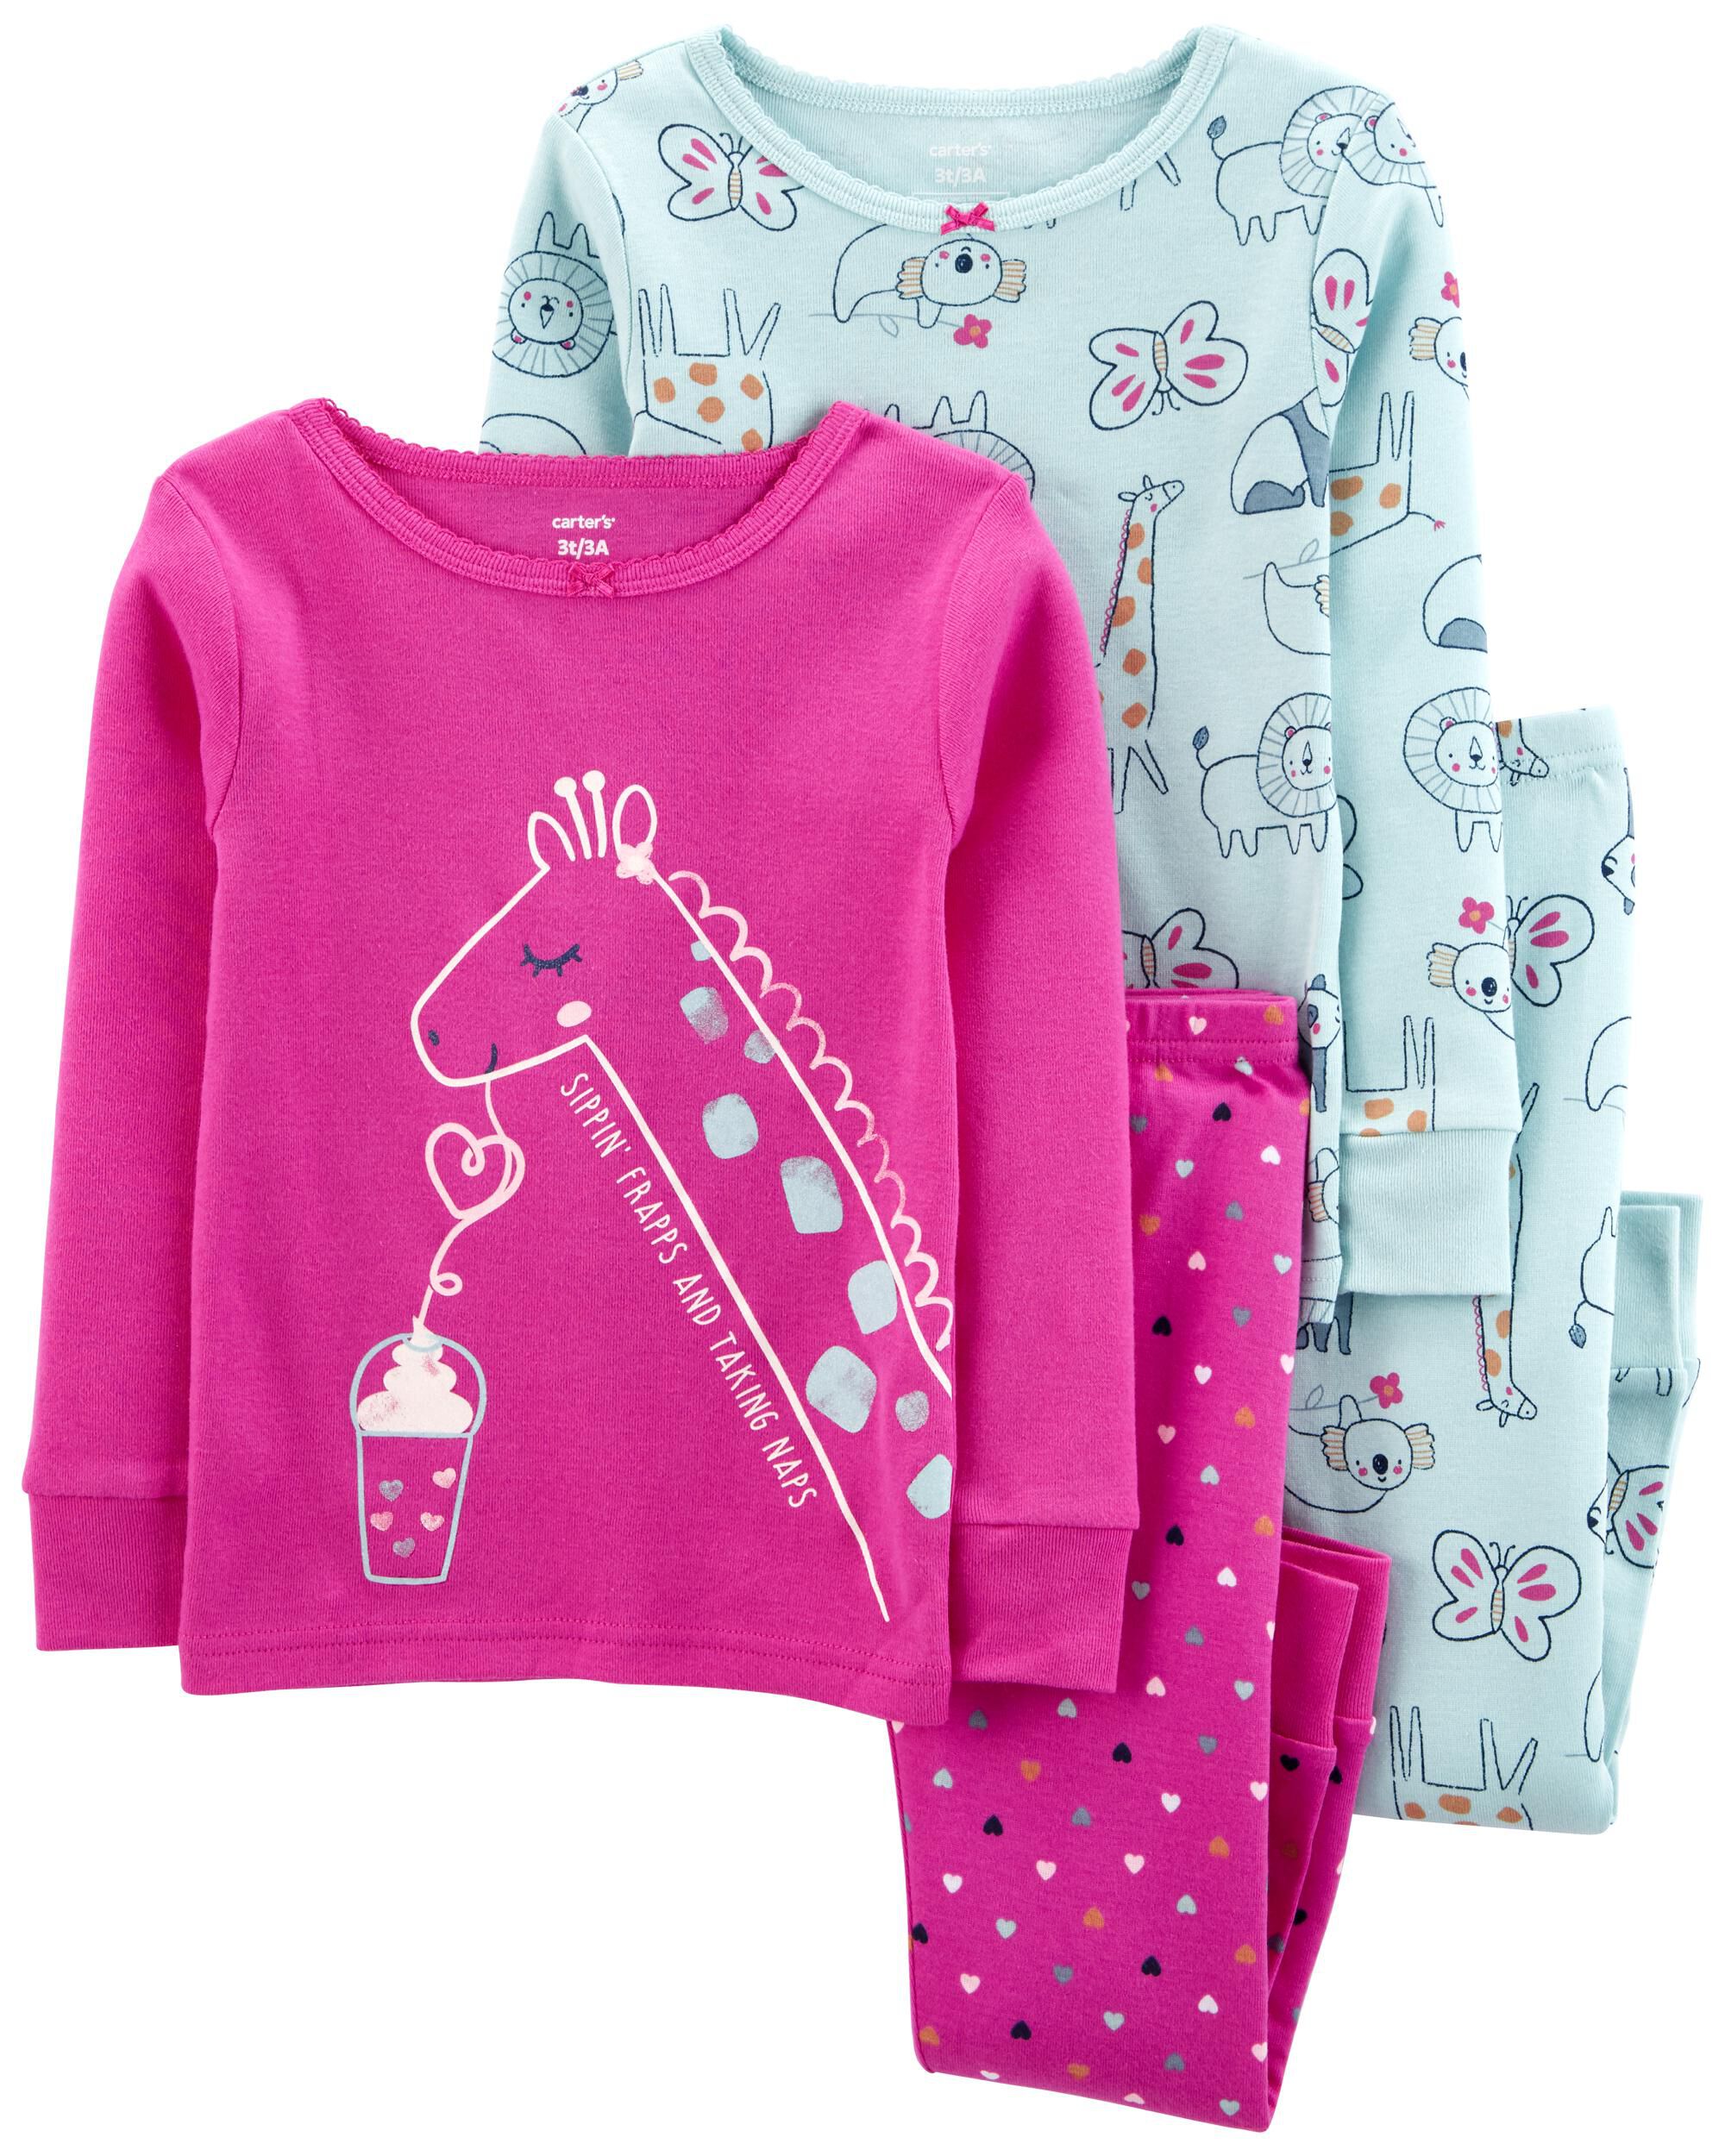 Dream in Color Carters Toddler and Baby Girls 4 Piece Cotton Pajama Set 